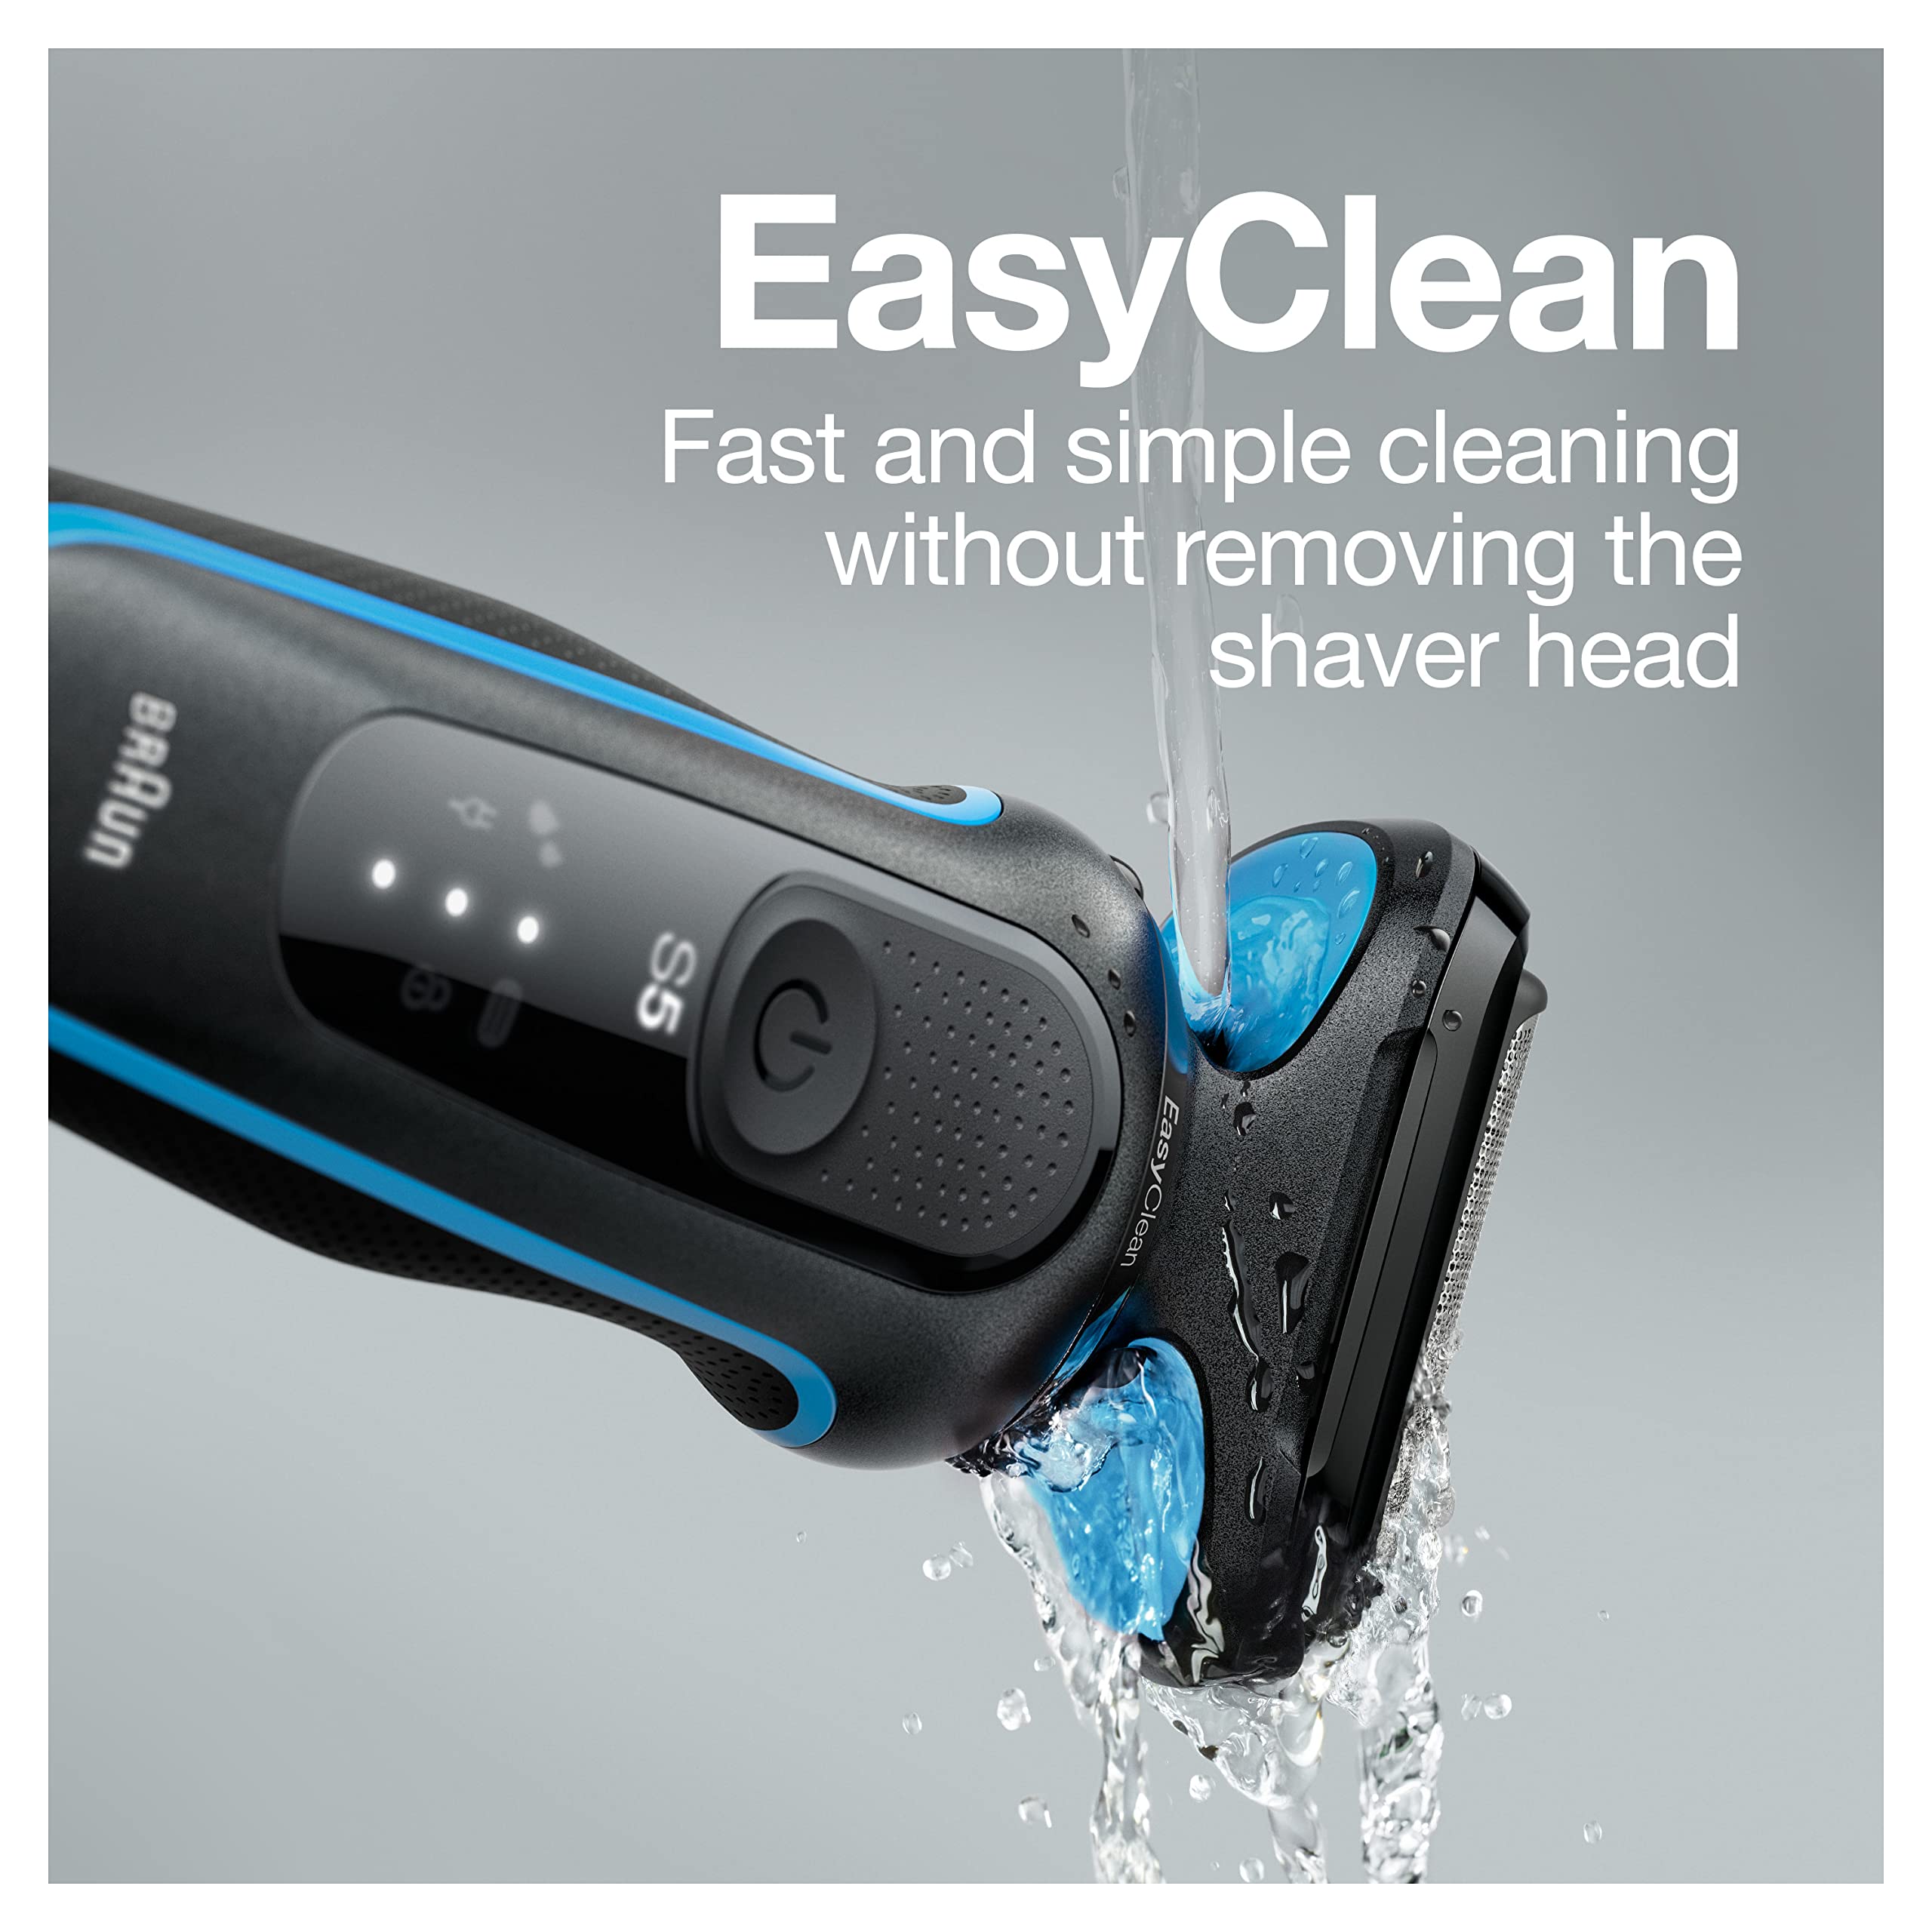 Braun Series 5 5049cs Electric Shaver with Charging Stand, Beard Trimmer, Face Shaver, Wet & Dry, Rechargeable, Cordless Foil Shaver, Blue